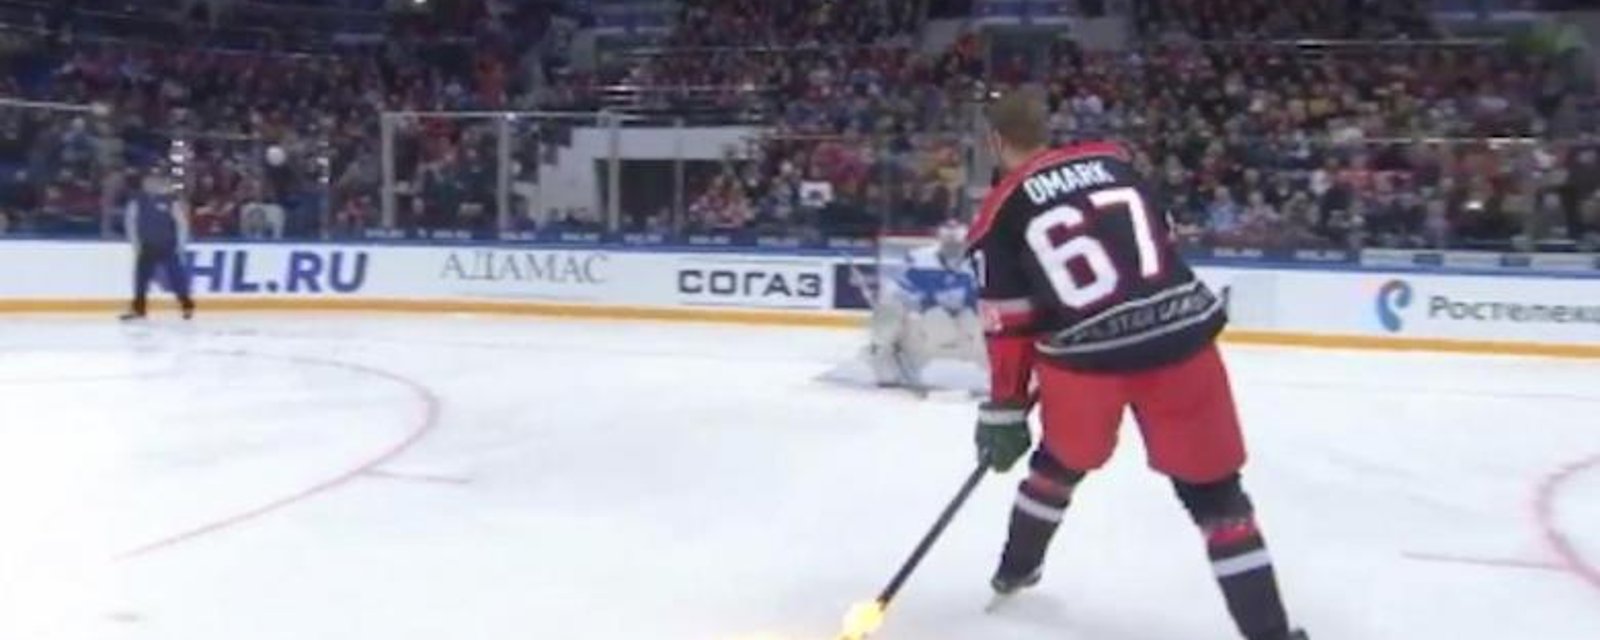 Must See: Linus Omark's badass shootout trick at the KHL skills competition.